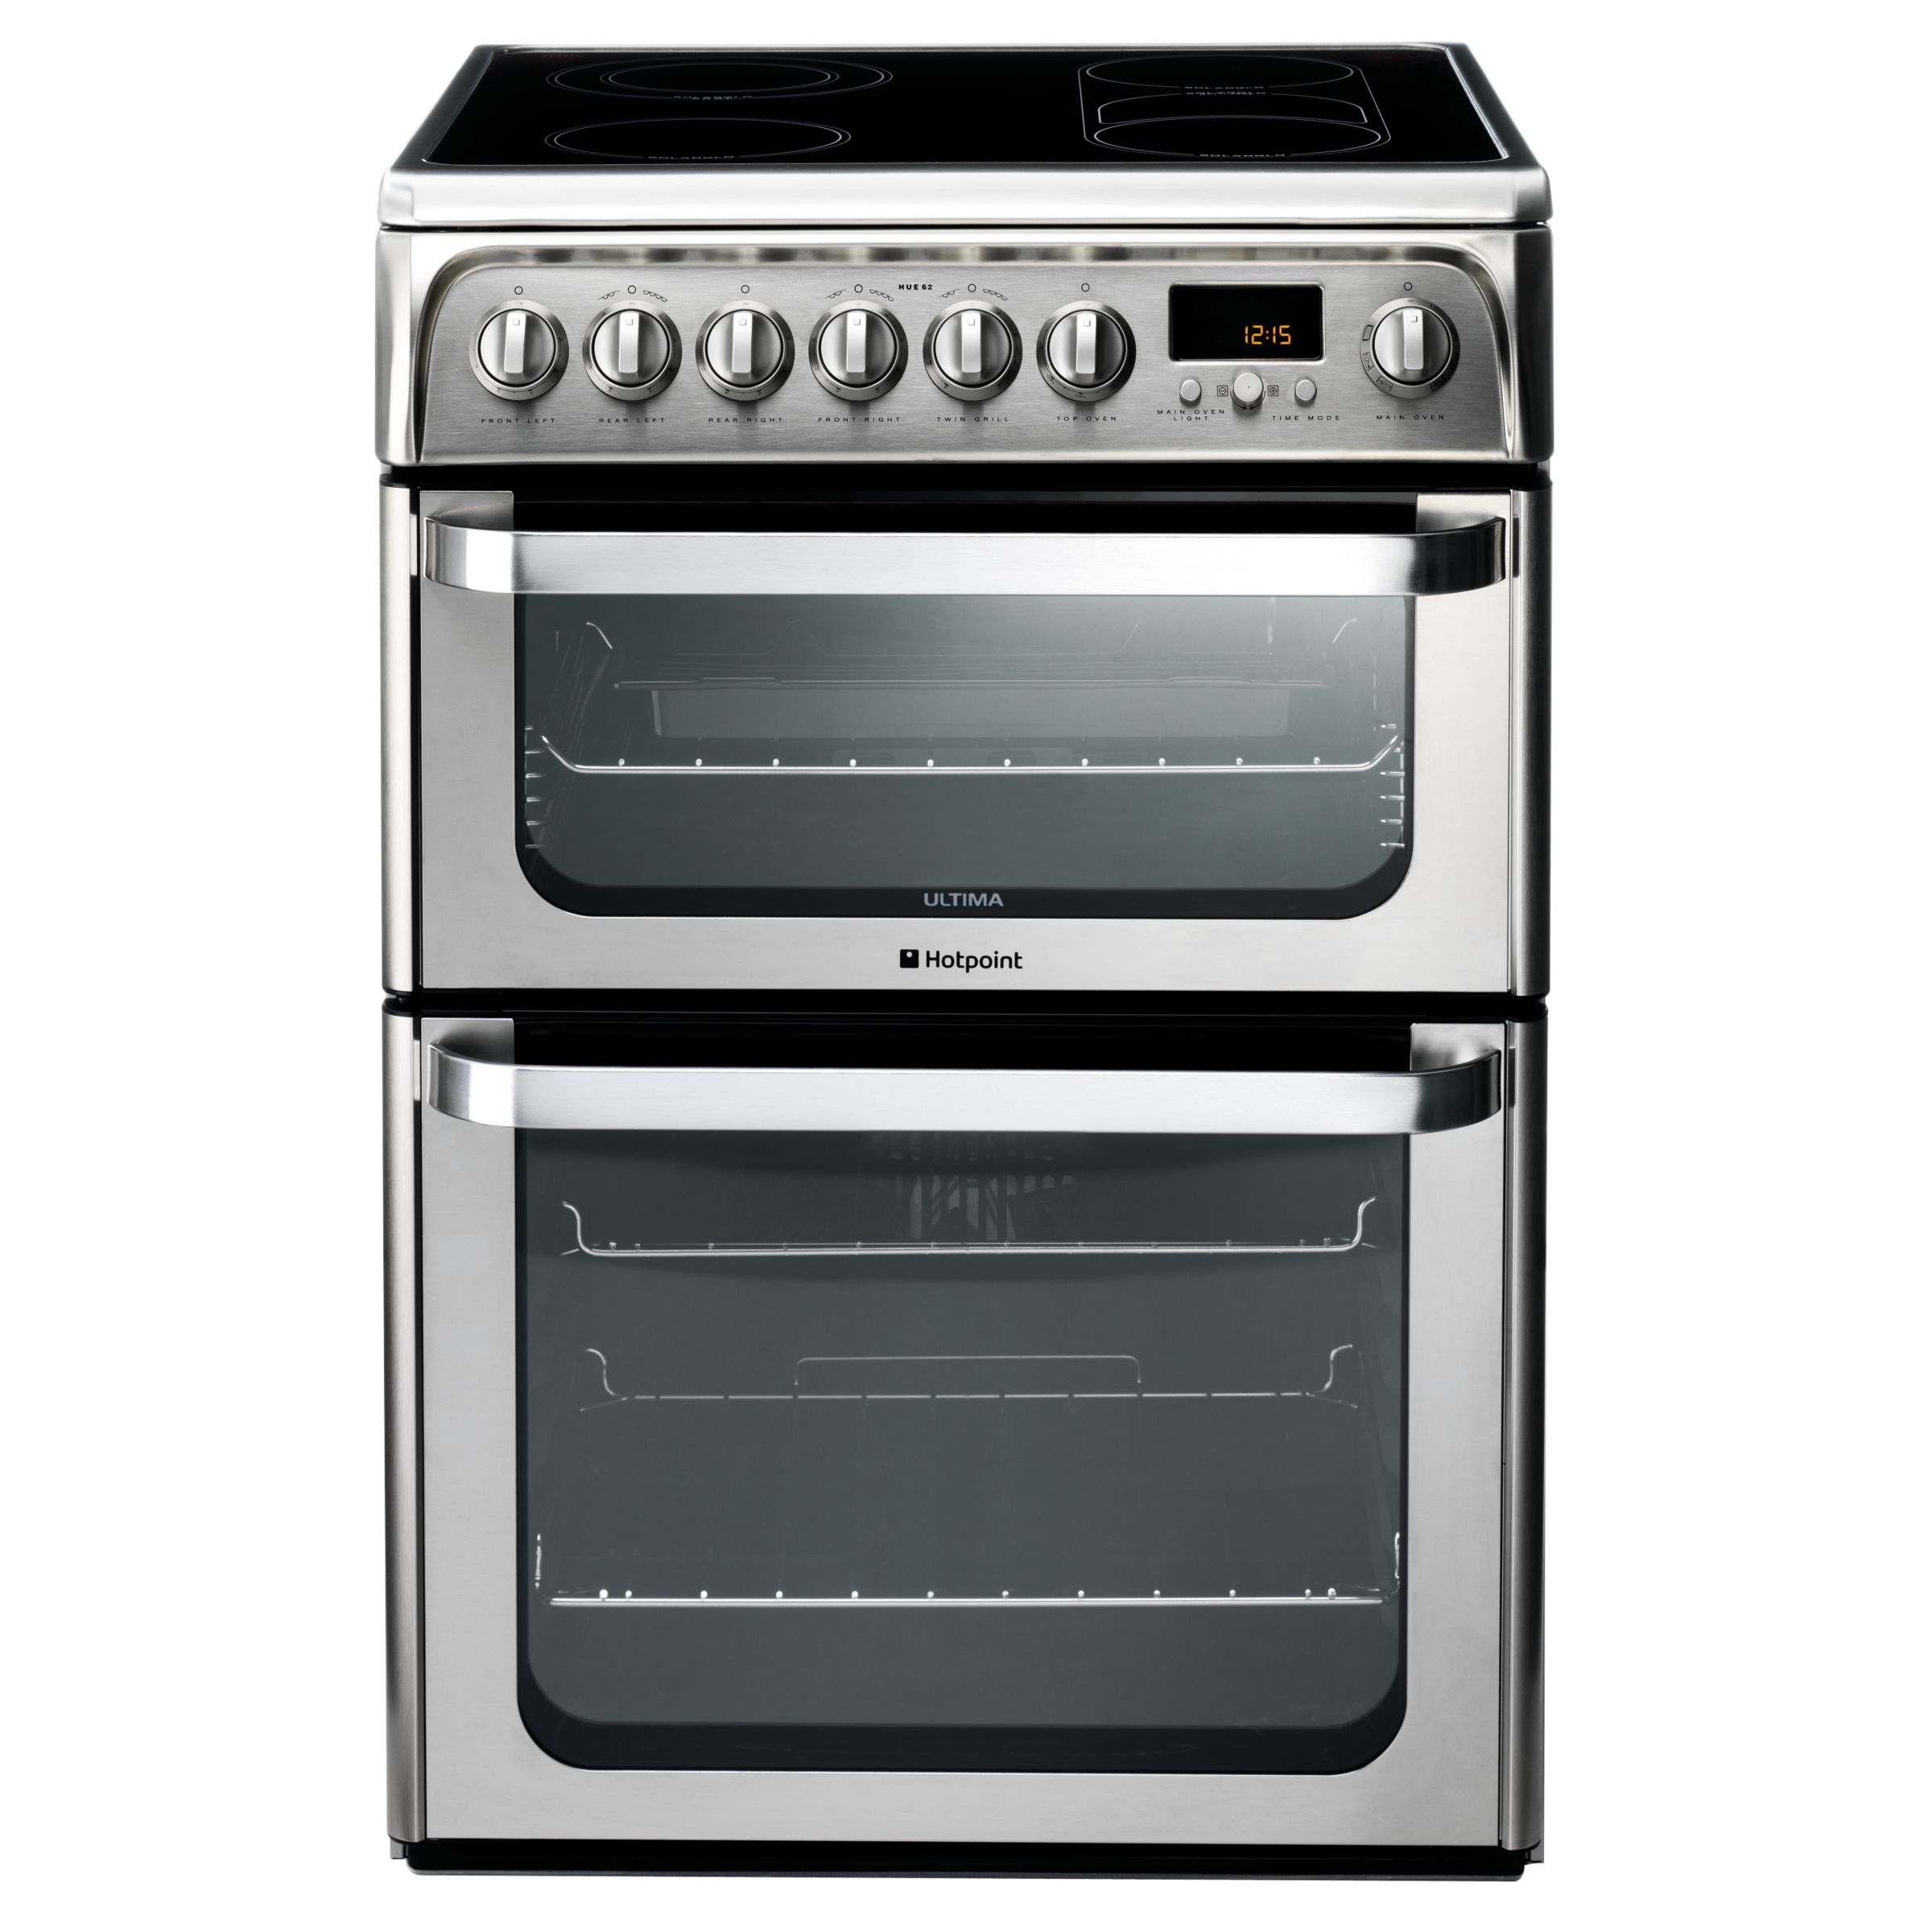 Hotpoint Ultima HUE62X Electric Cooker, Stainless Steel at John Lewis